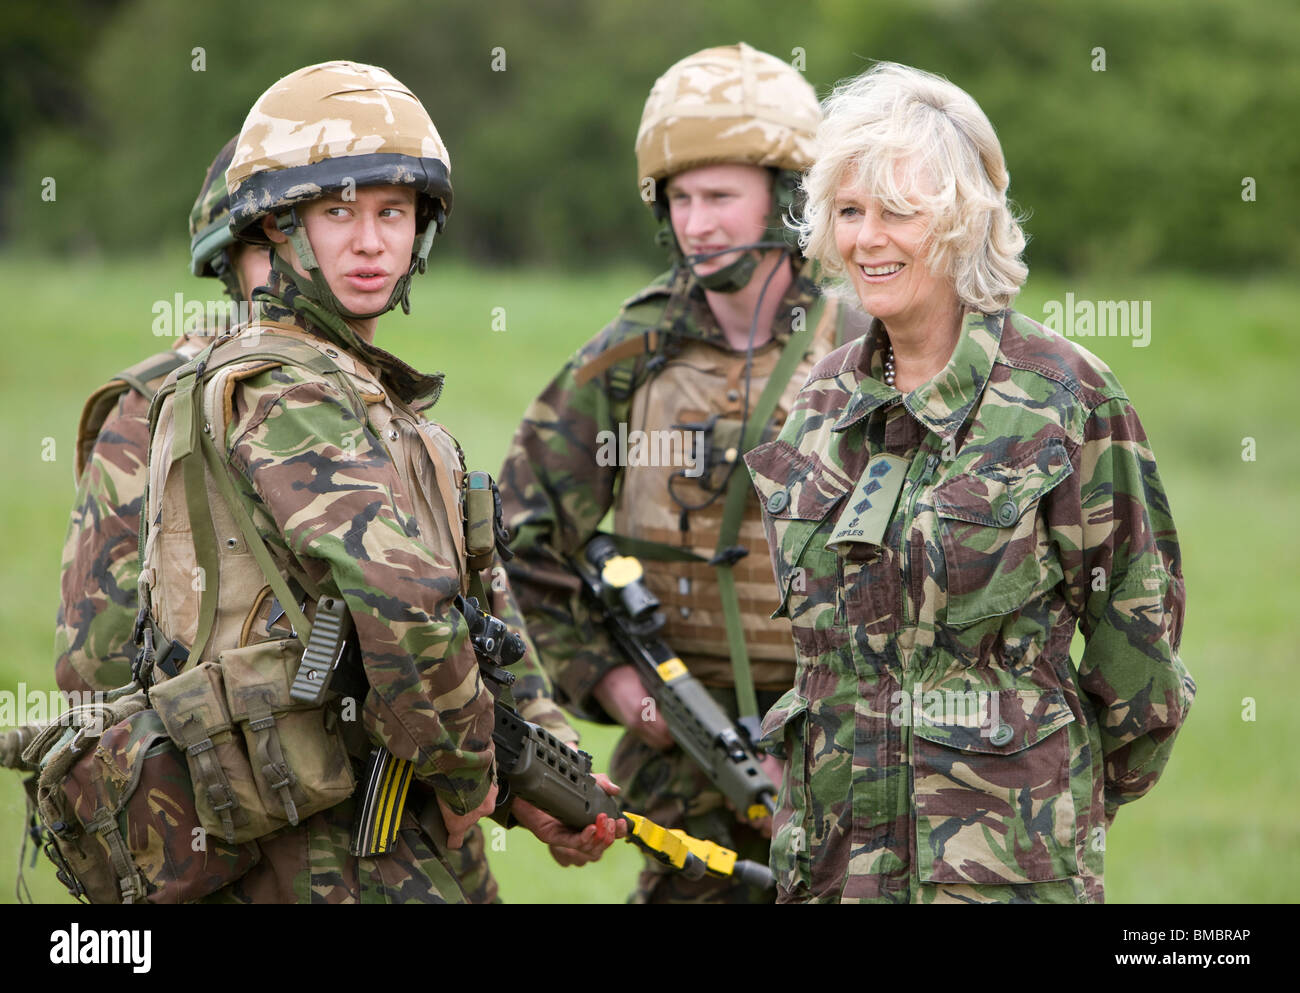 Camilla, Duchess of Cornwall, Royal Colonel, 4th Battalion, The Rifles visits the Rifles at Bramley Training Area in Hampshire Stock Photo